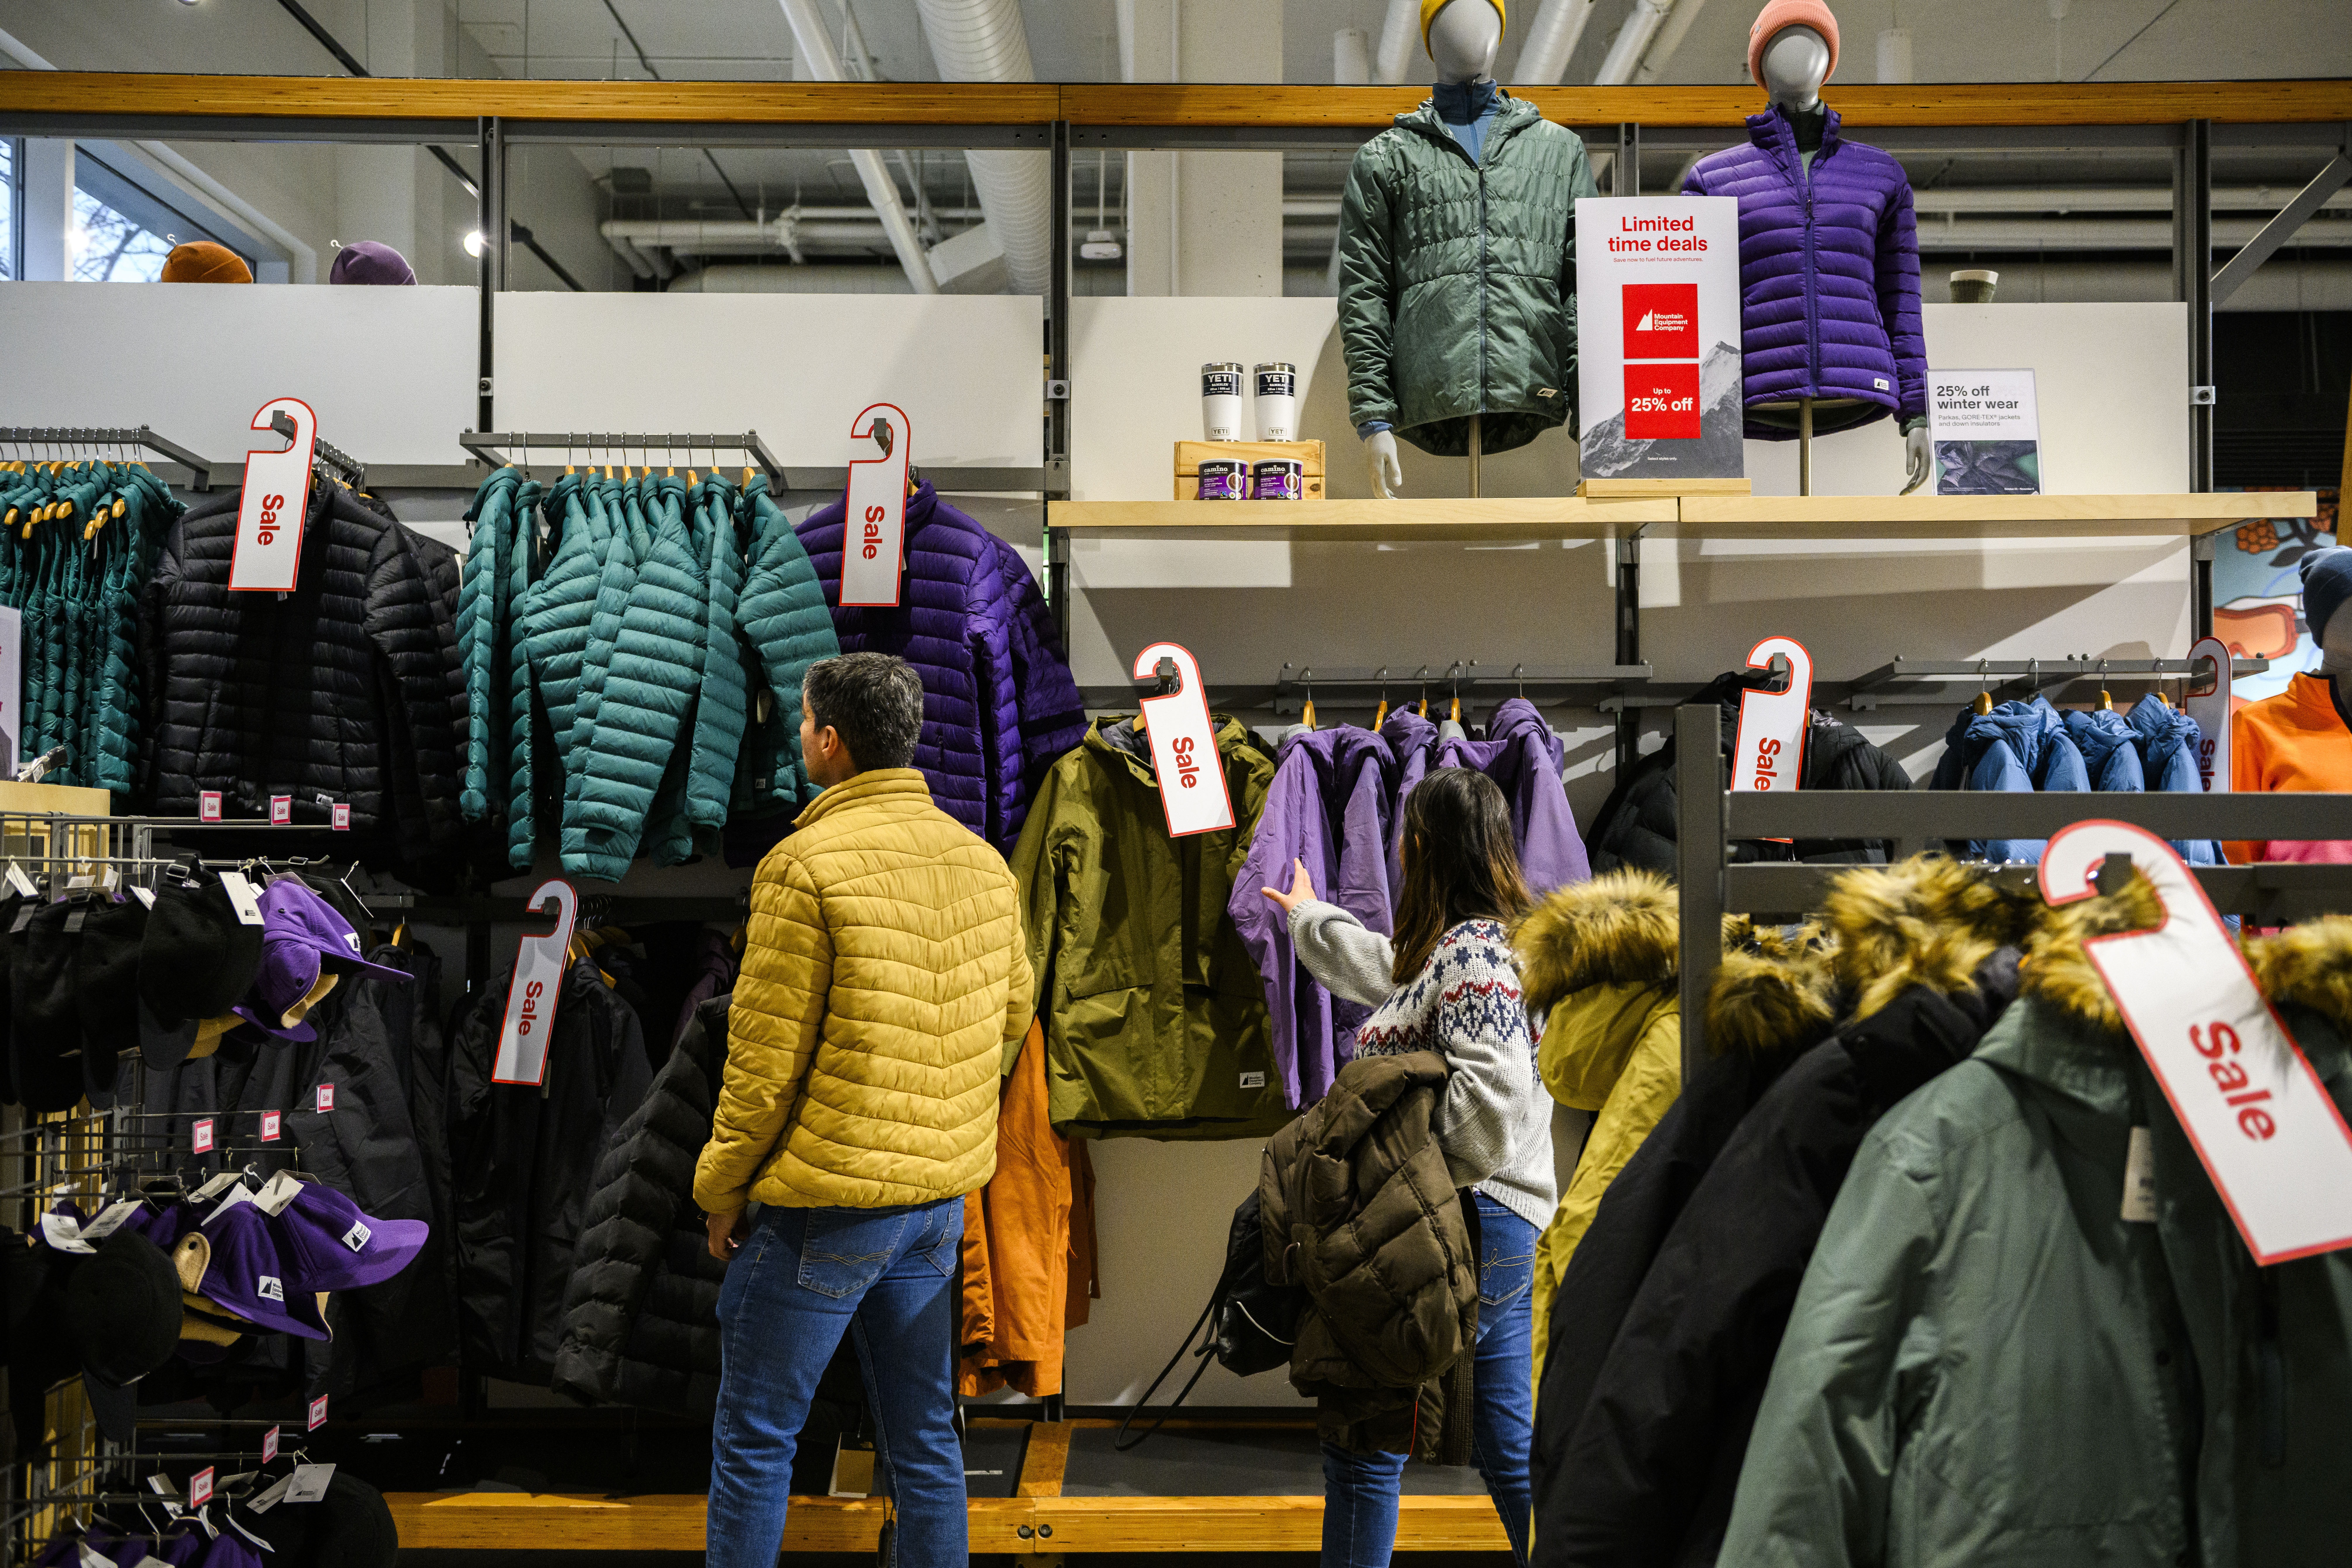 A clothing glut means shoppers can look forward to holiday discounts. : NPR